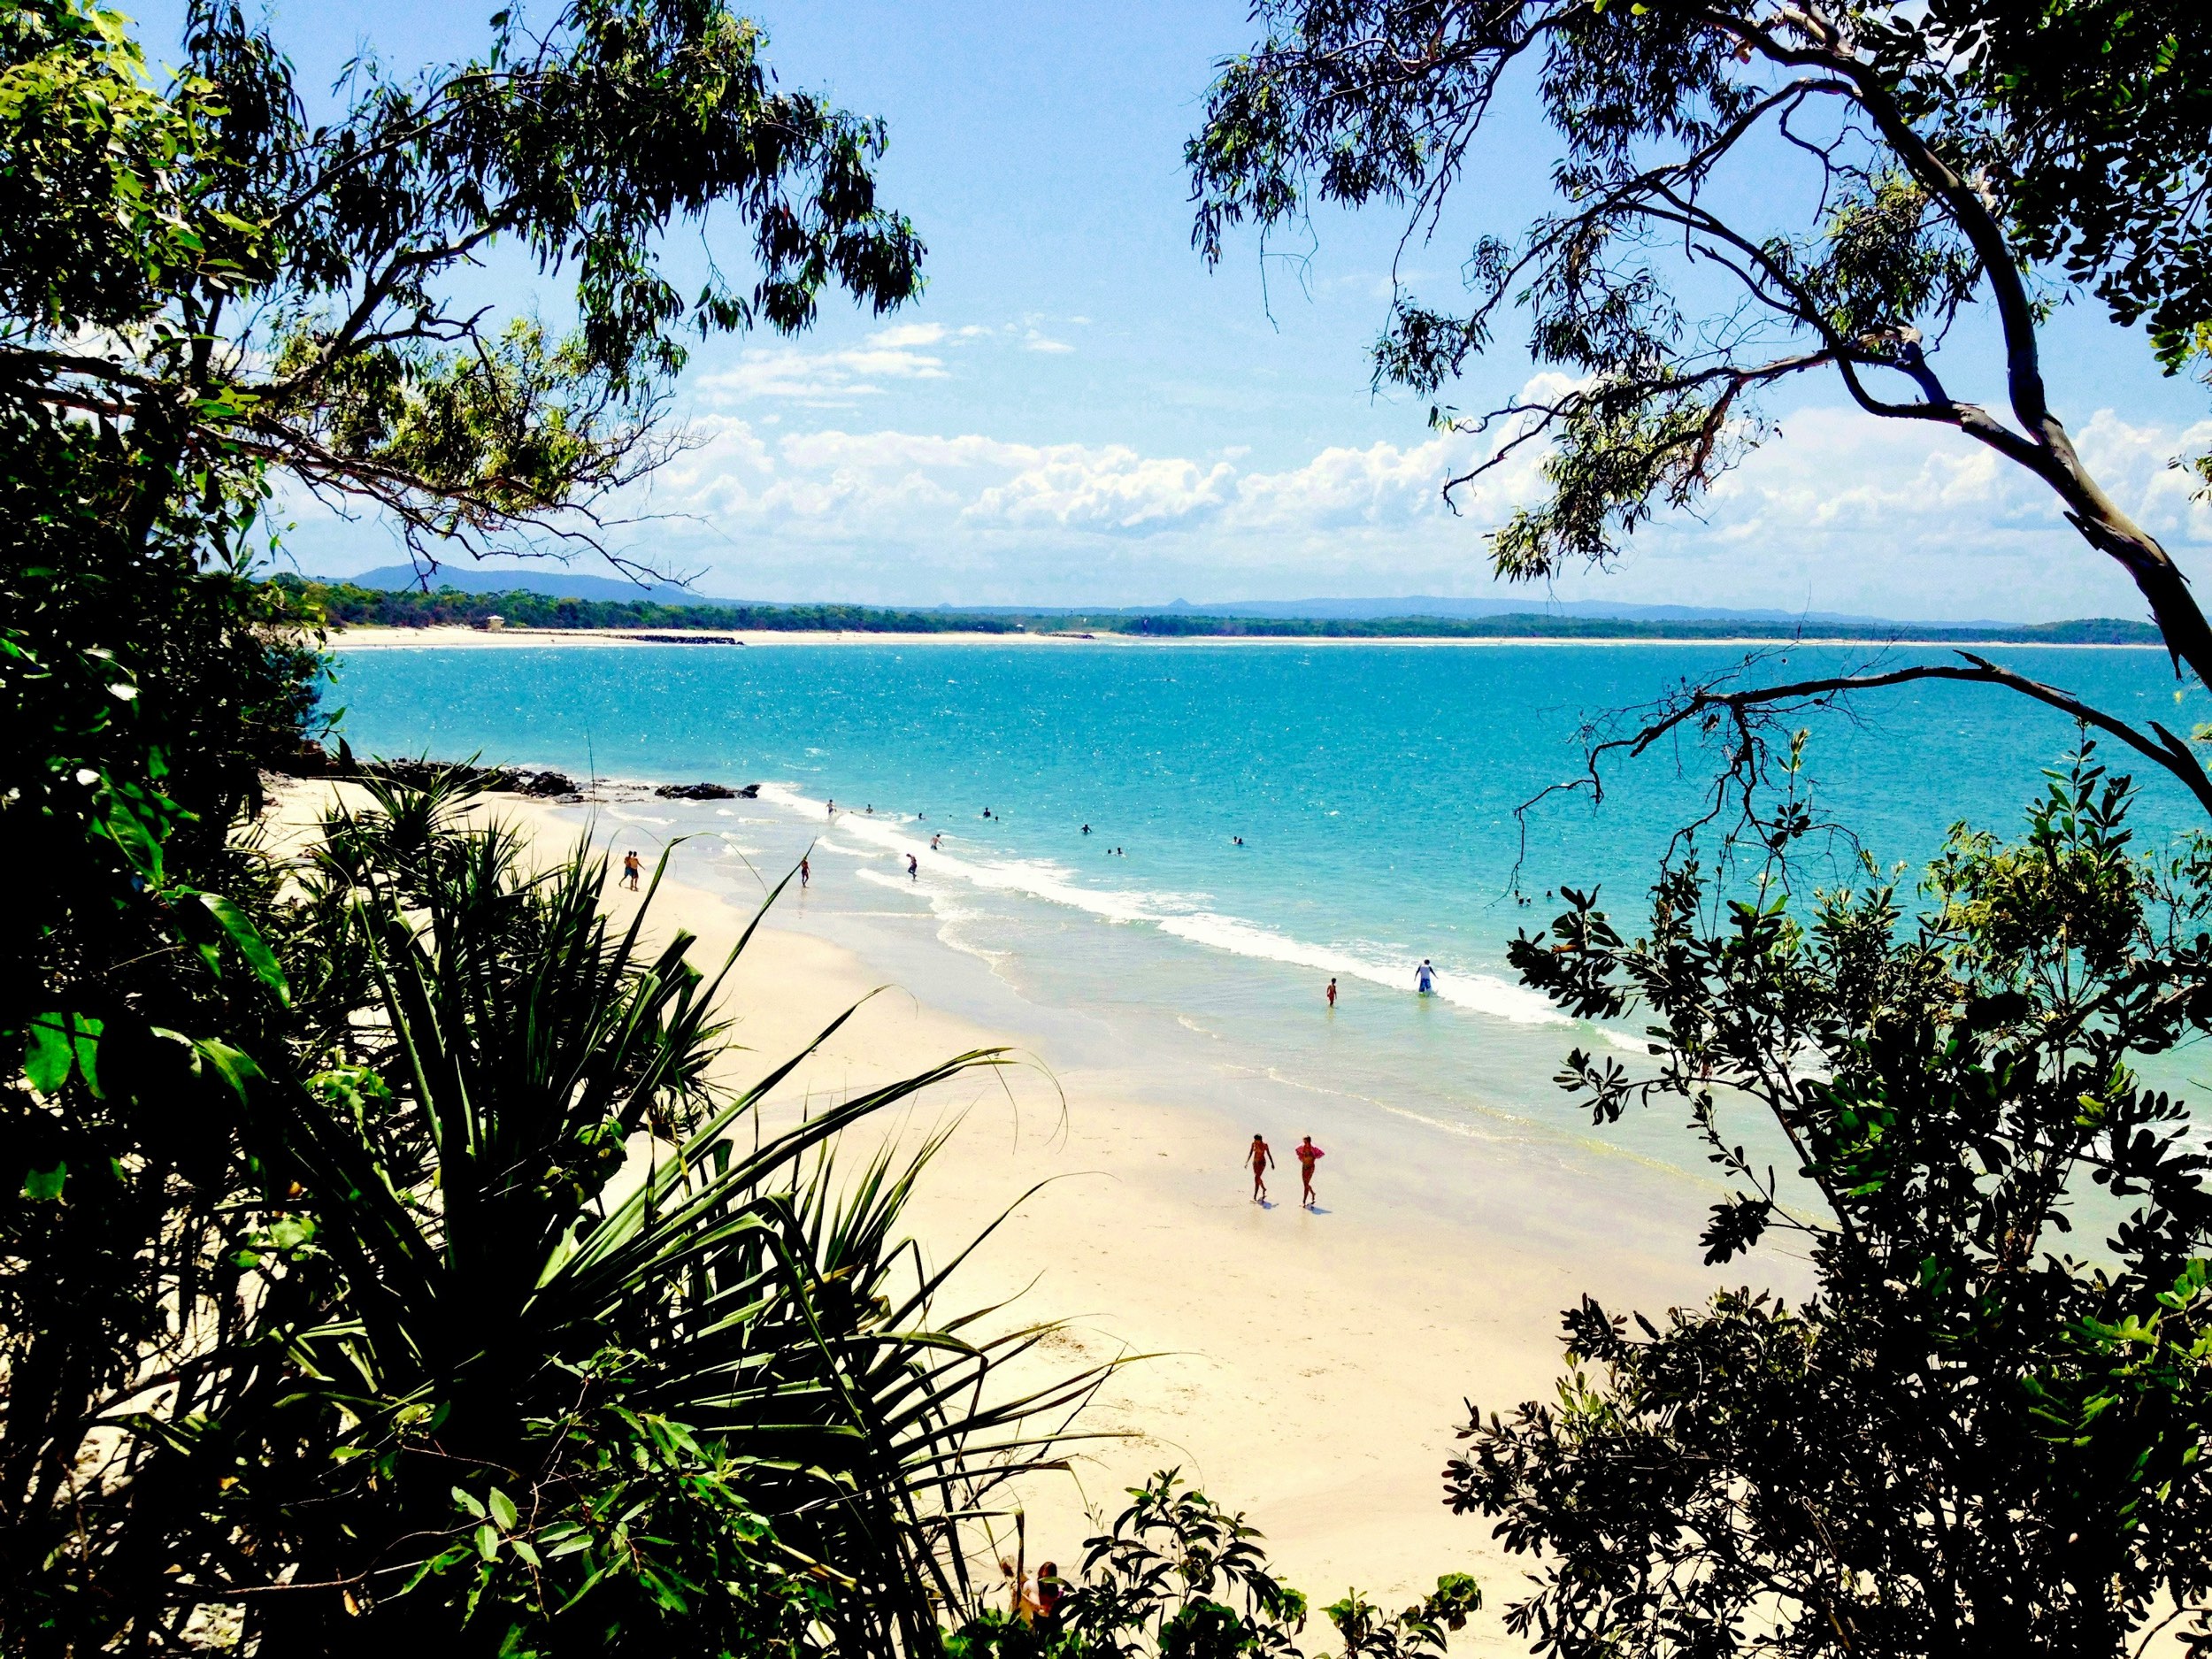 Looking down at little cove from the coastal track in Noosa